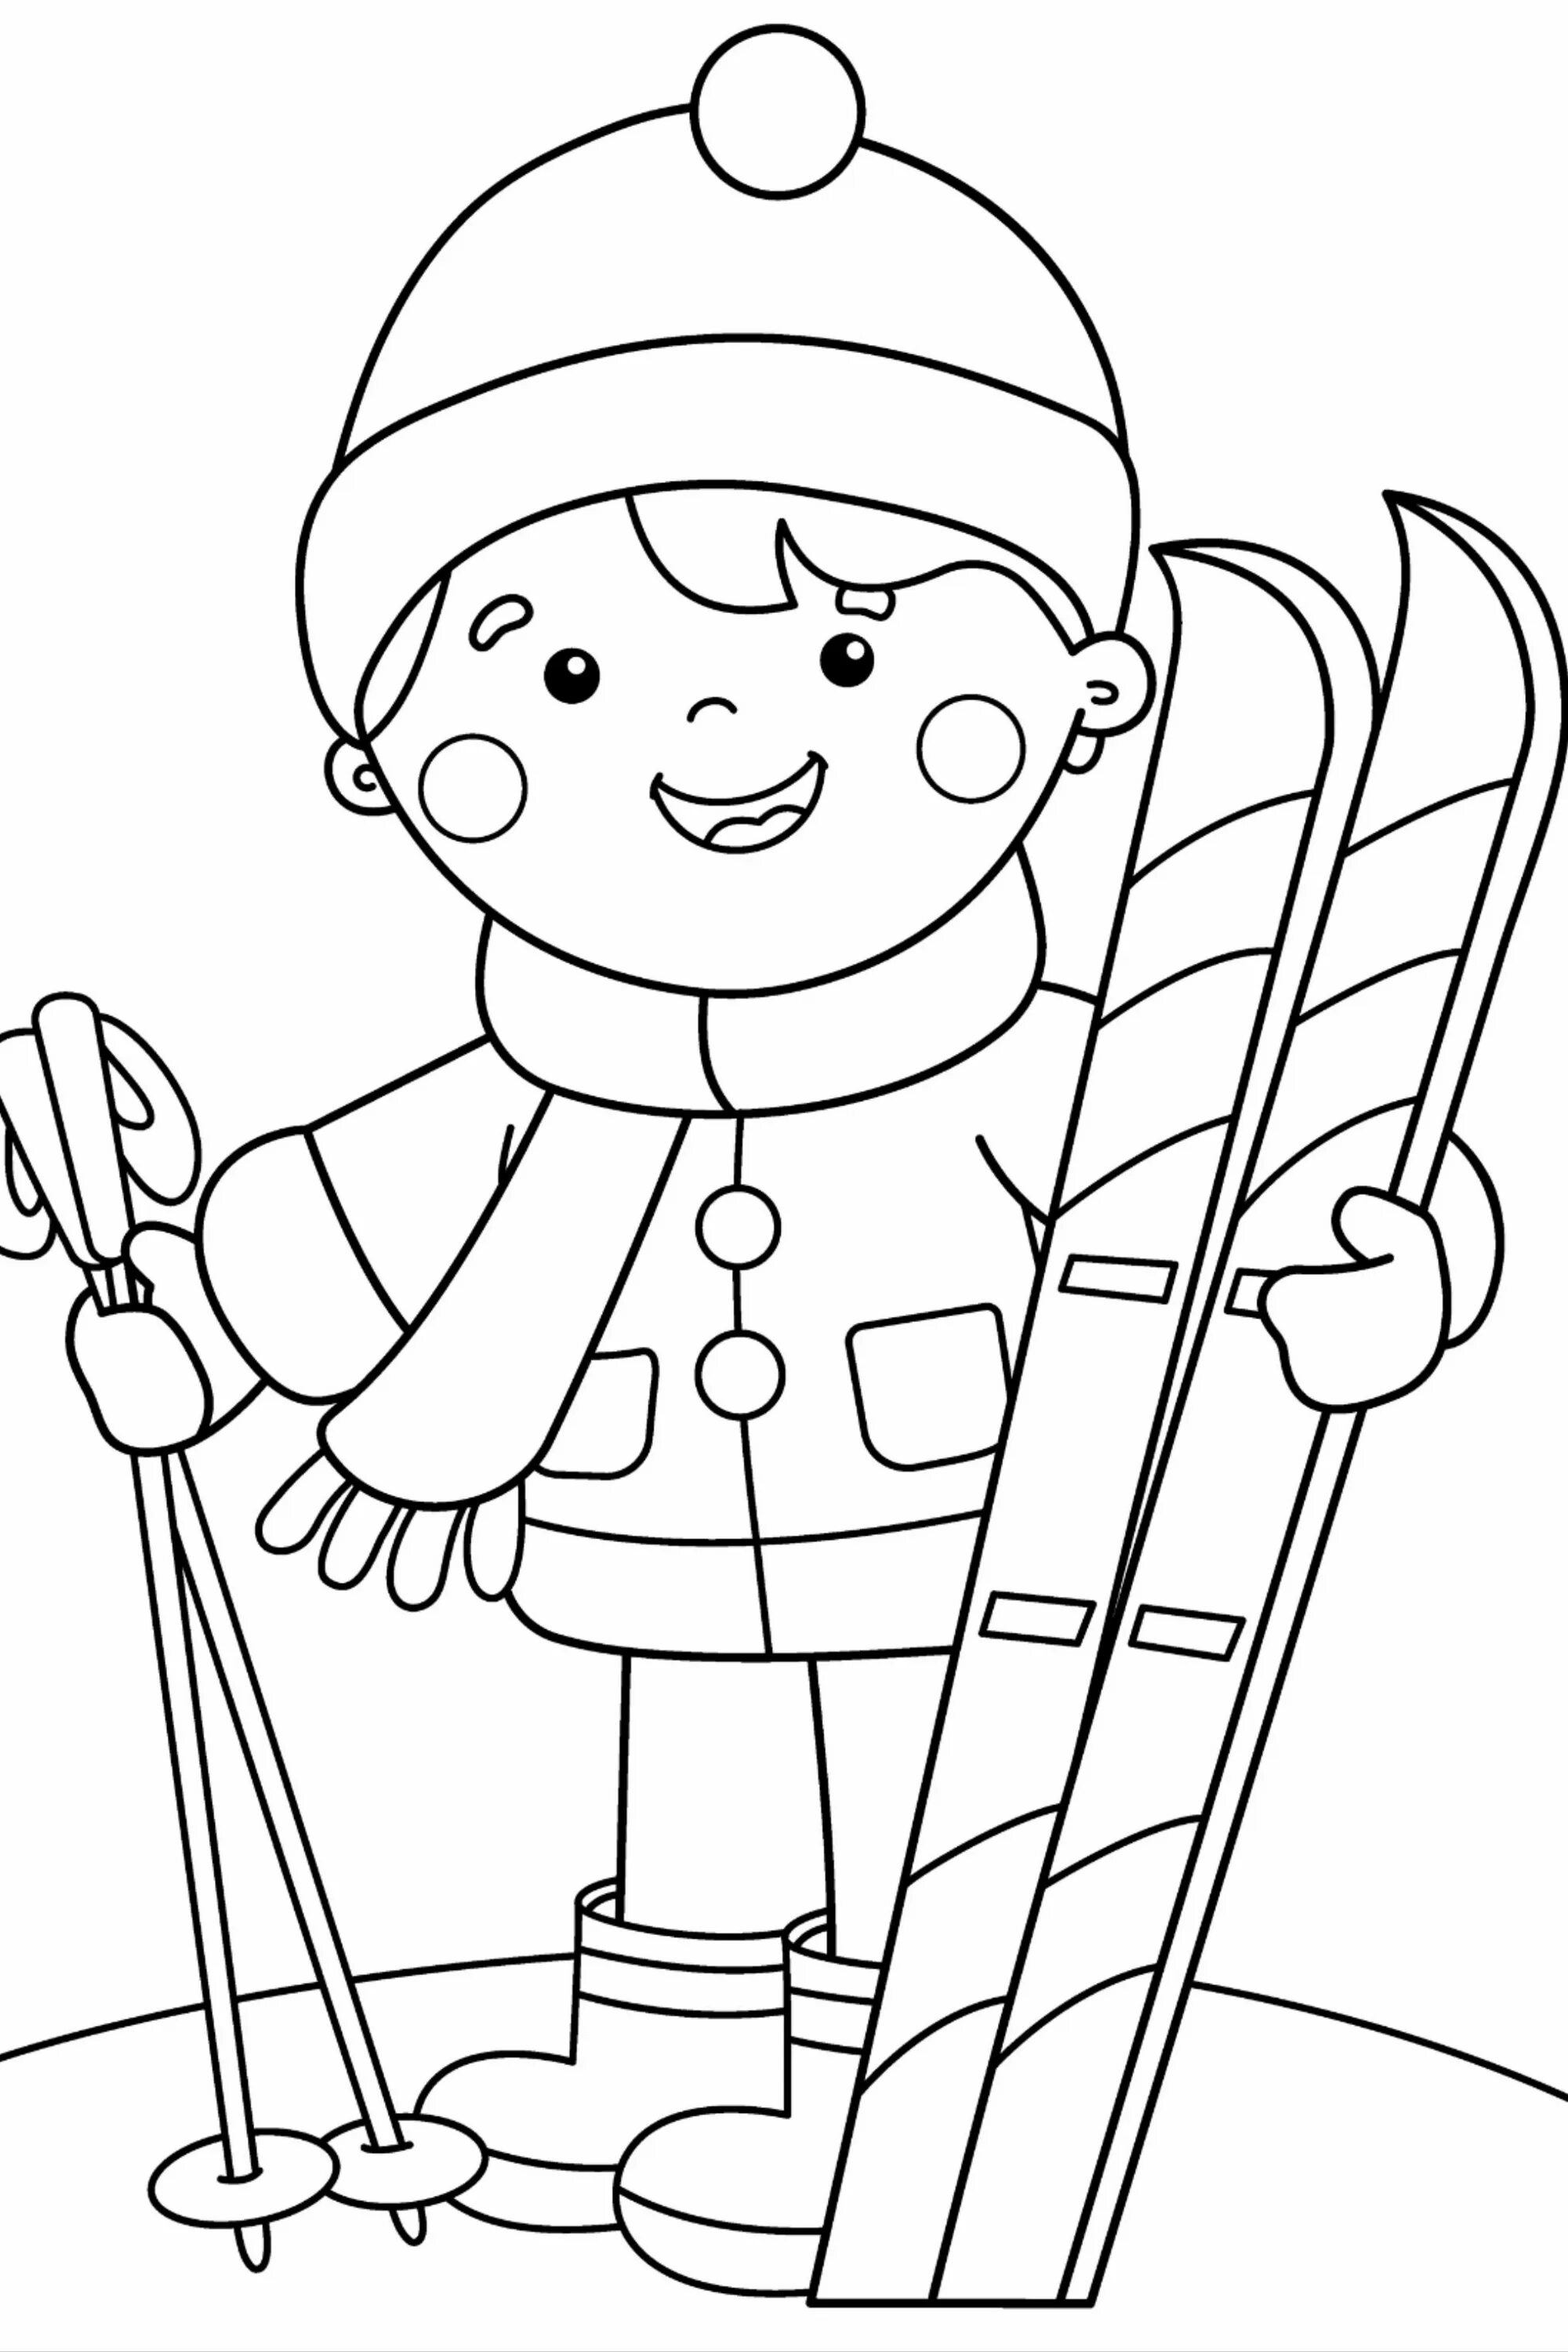 Adorable skier coloring page for preschoolers